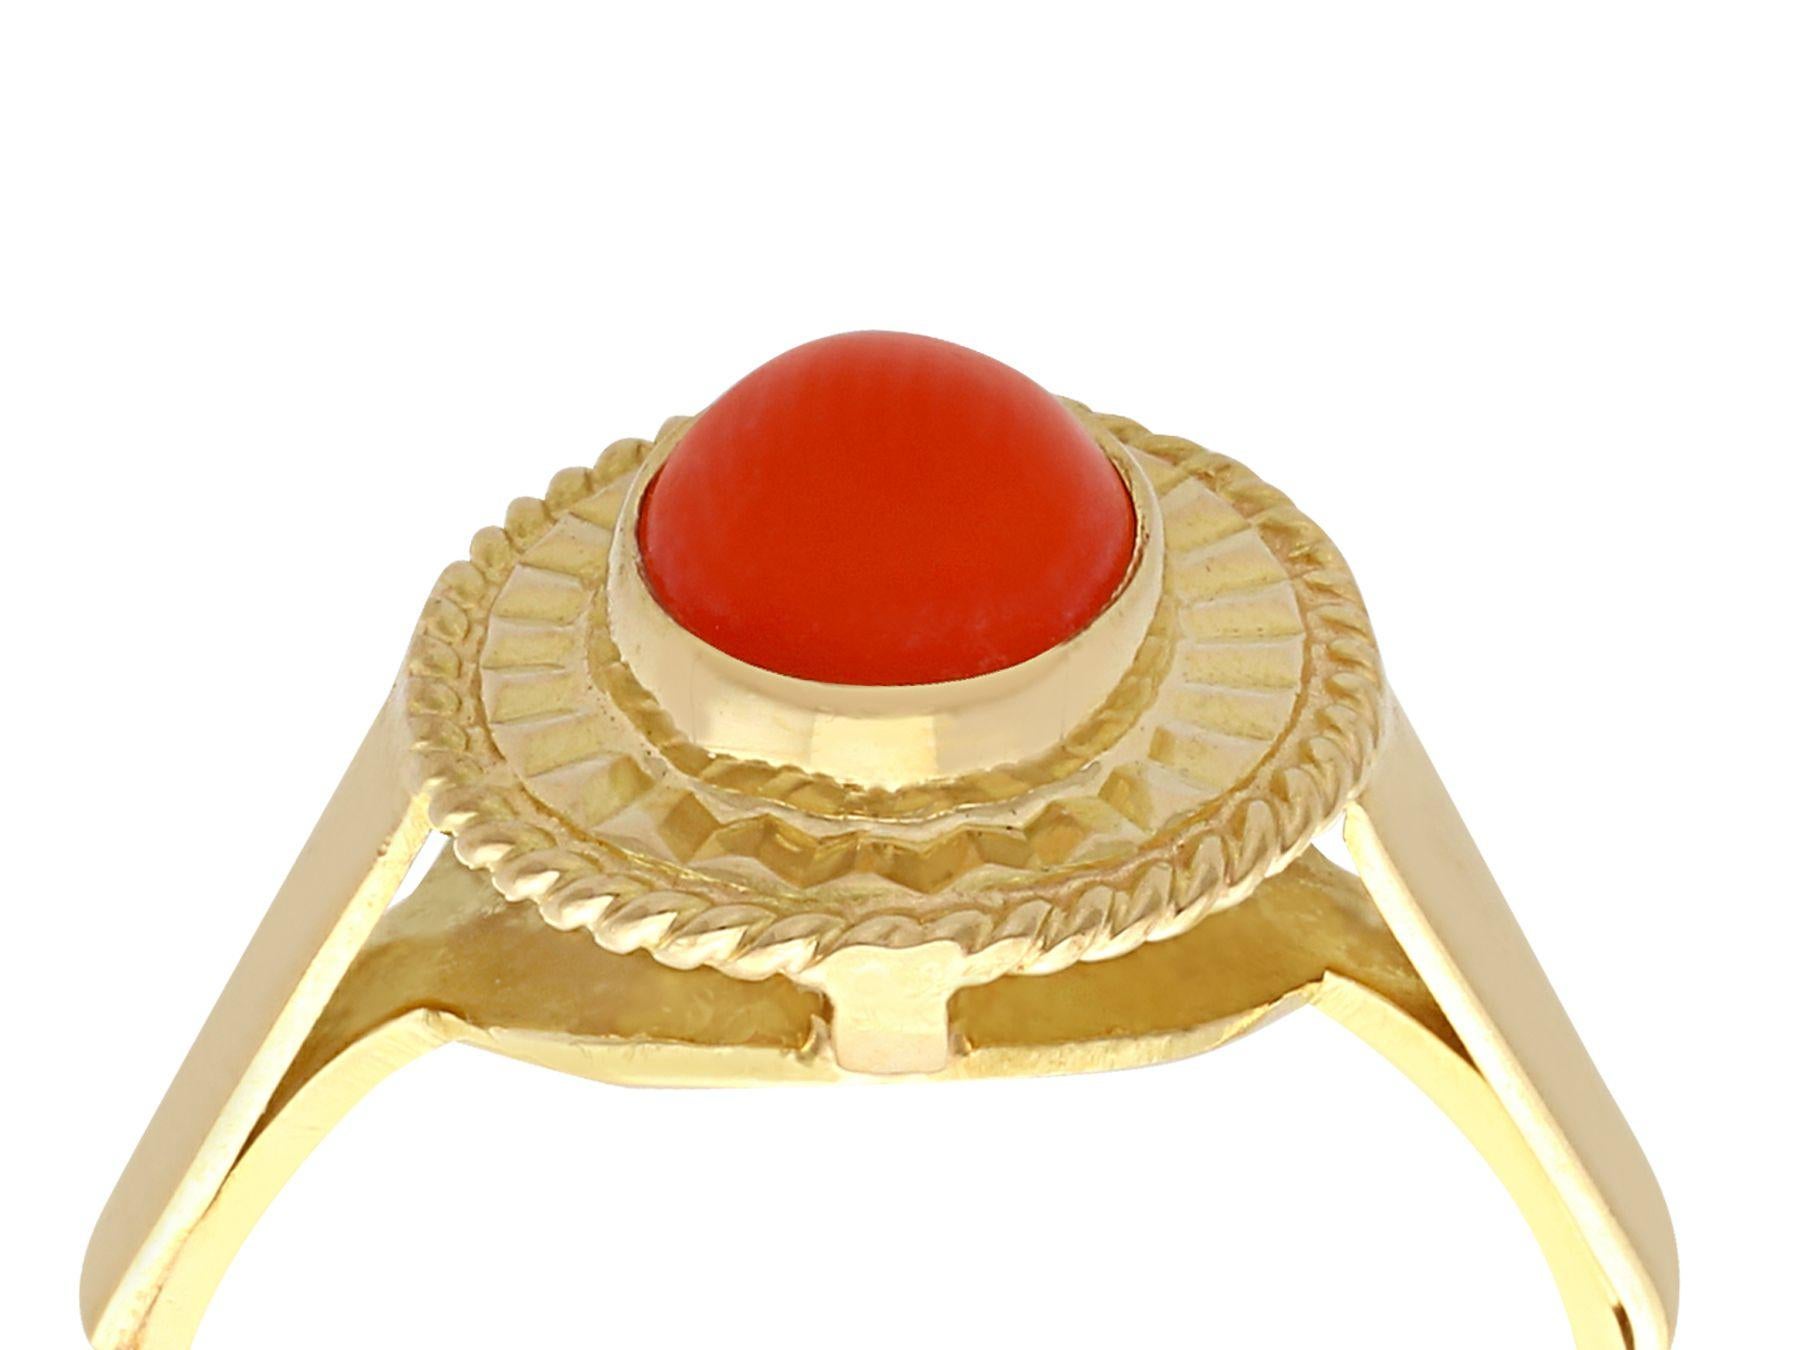 A fine and impressive coral and 18k yellow gold dress ring; part of our diverse vintage jewelry and estate jewelry collections.

This fine and impressive vintage cabochon cut coral dress ring has been crafted in 18k yellow gold.

The oval mount